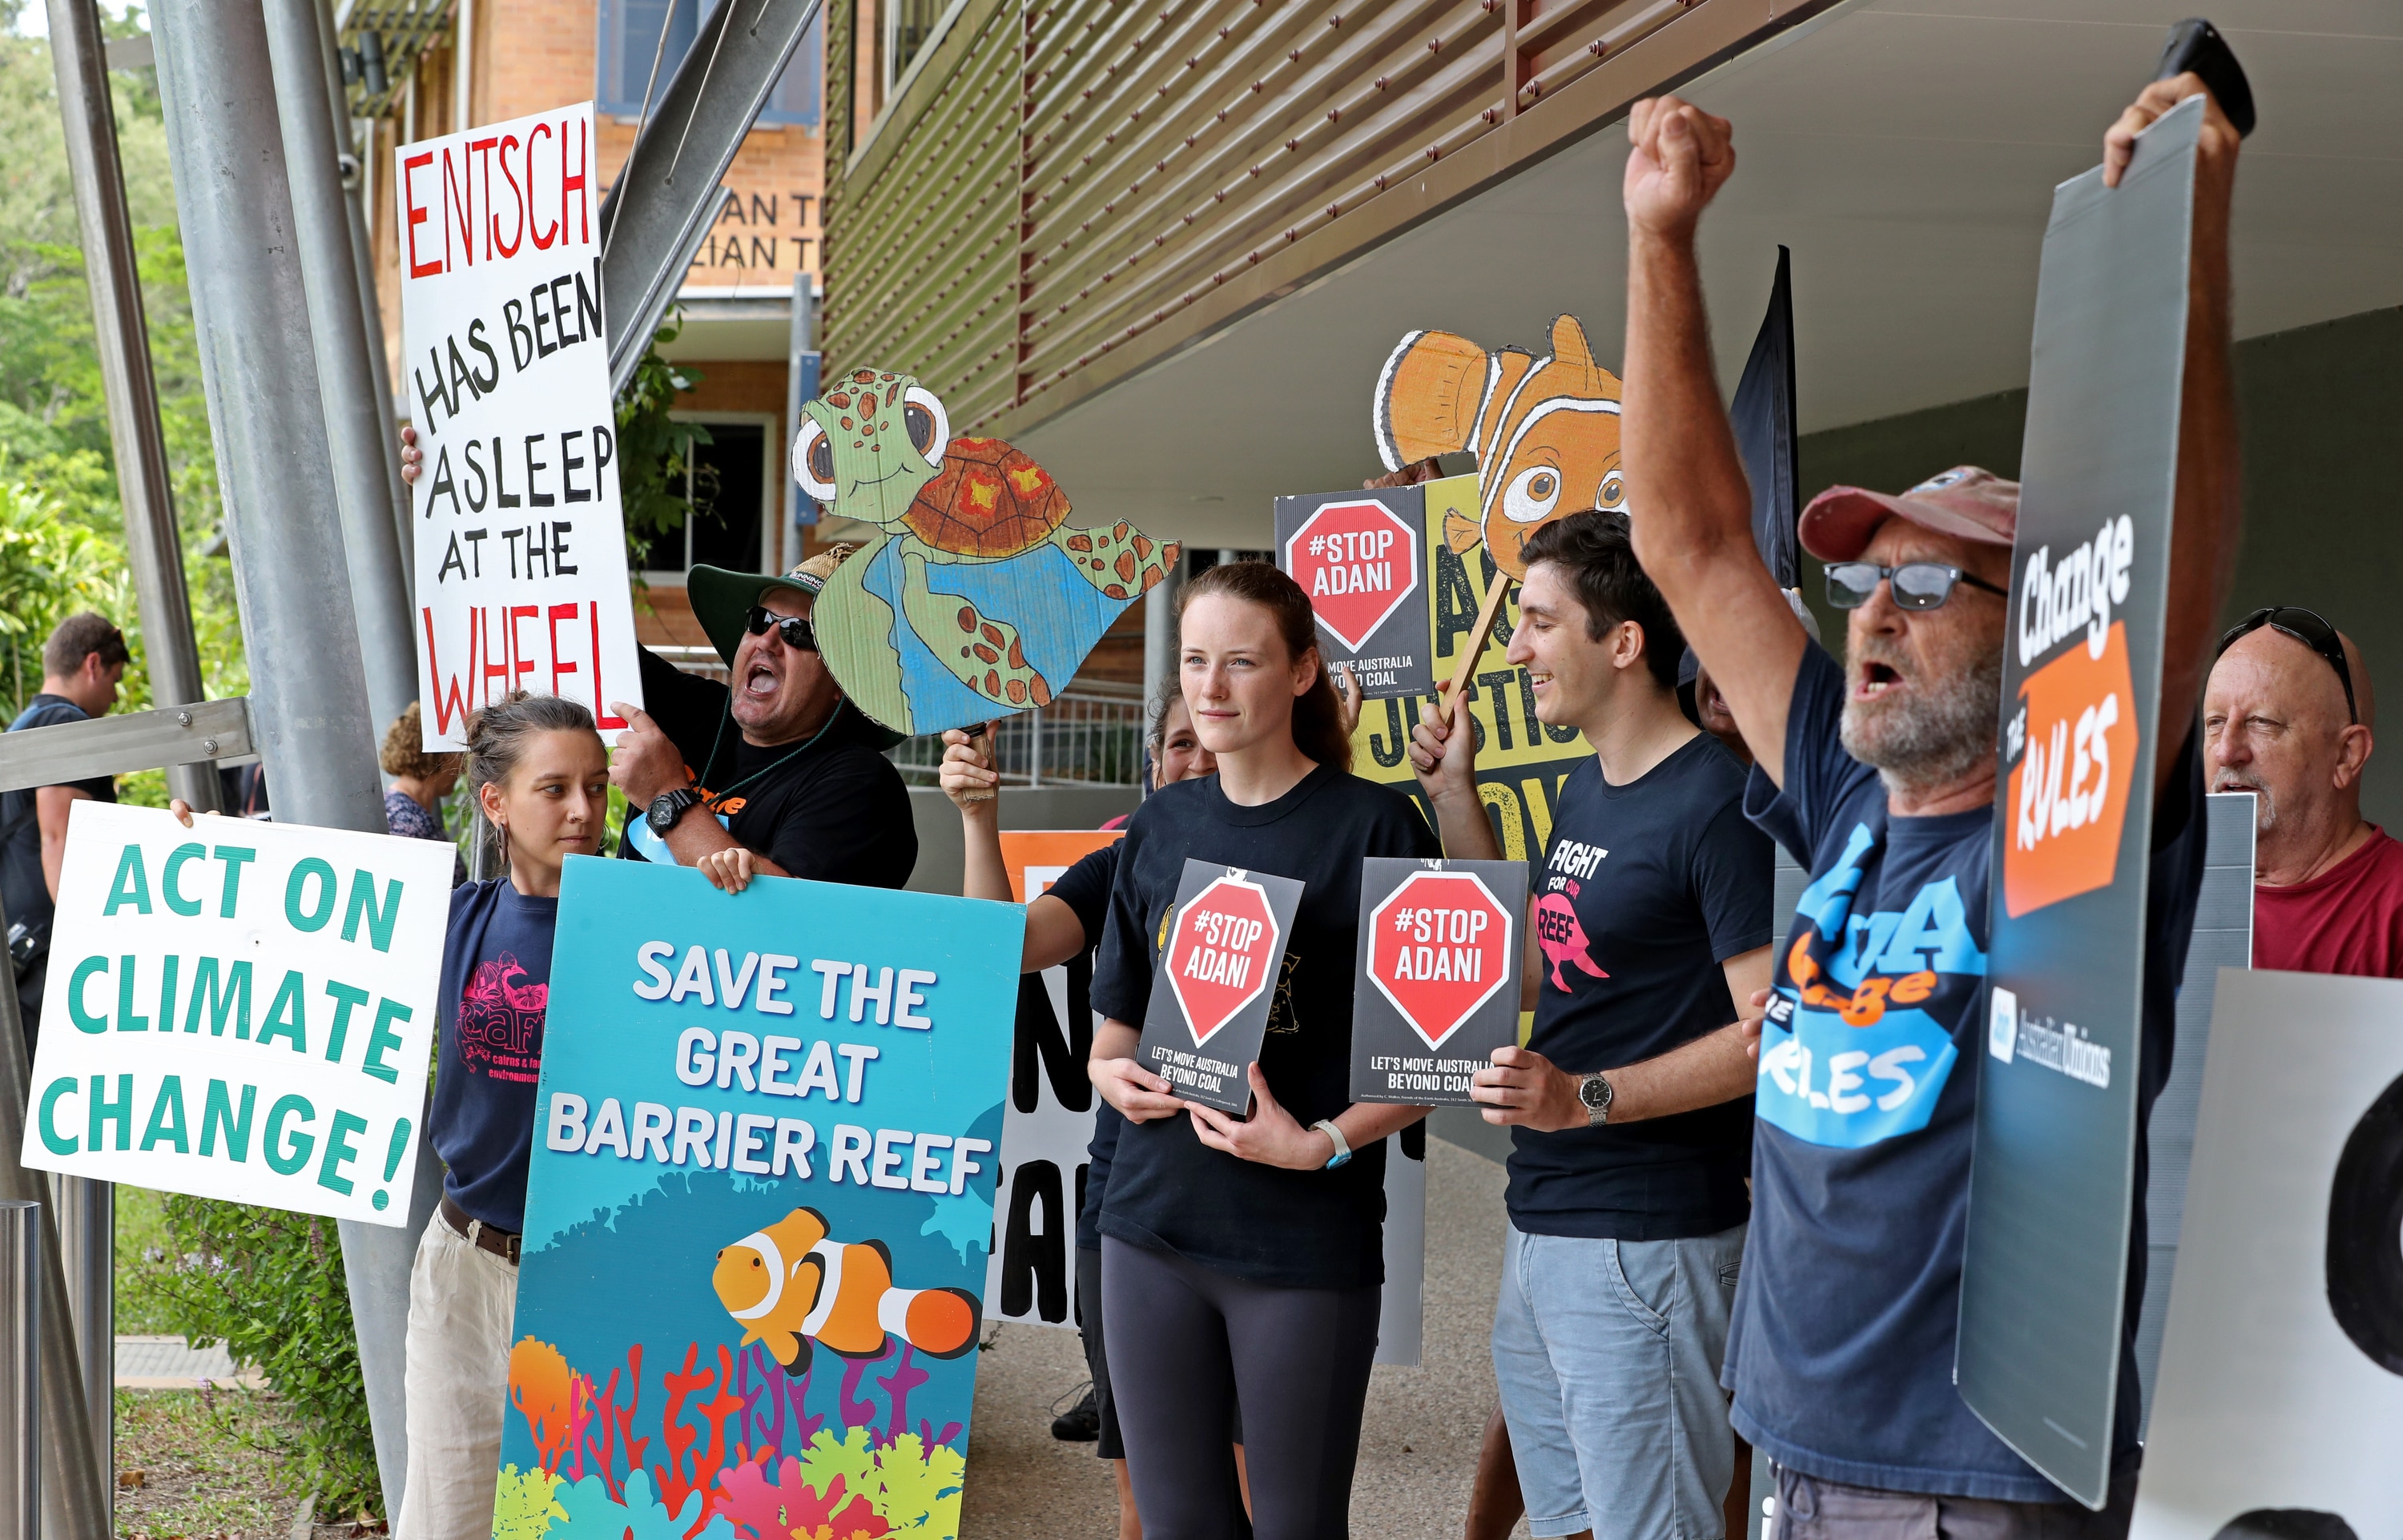 A small group of protesters greets Australian Prime Minister Scott Morrison and Warren Entsch MP during a visit to the Australian Institute of Tropical Health.